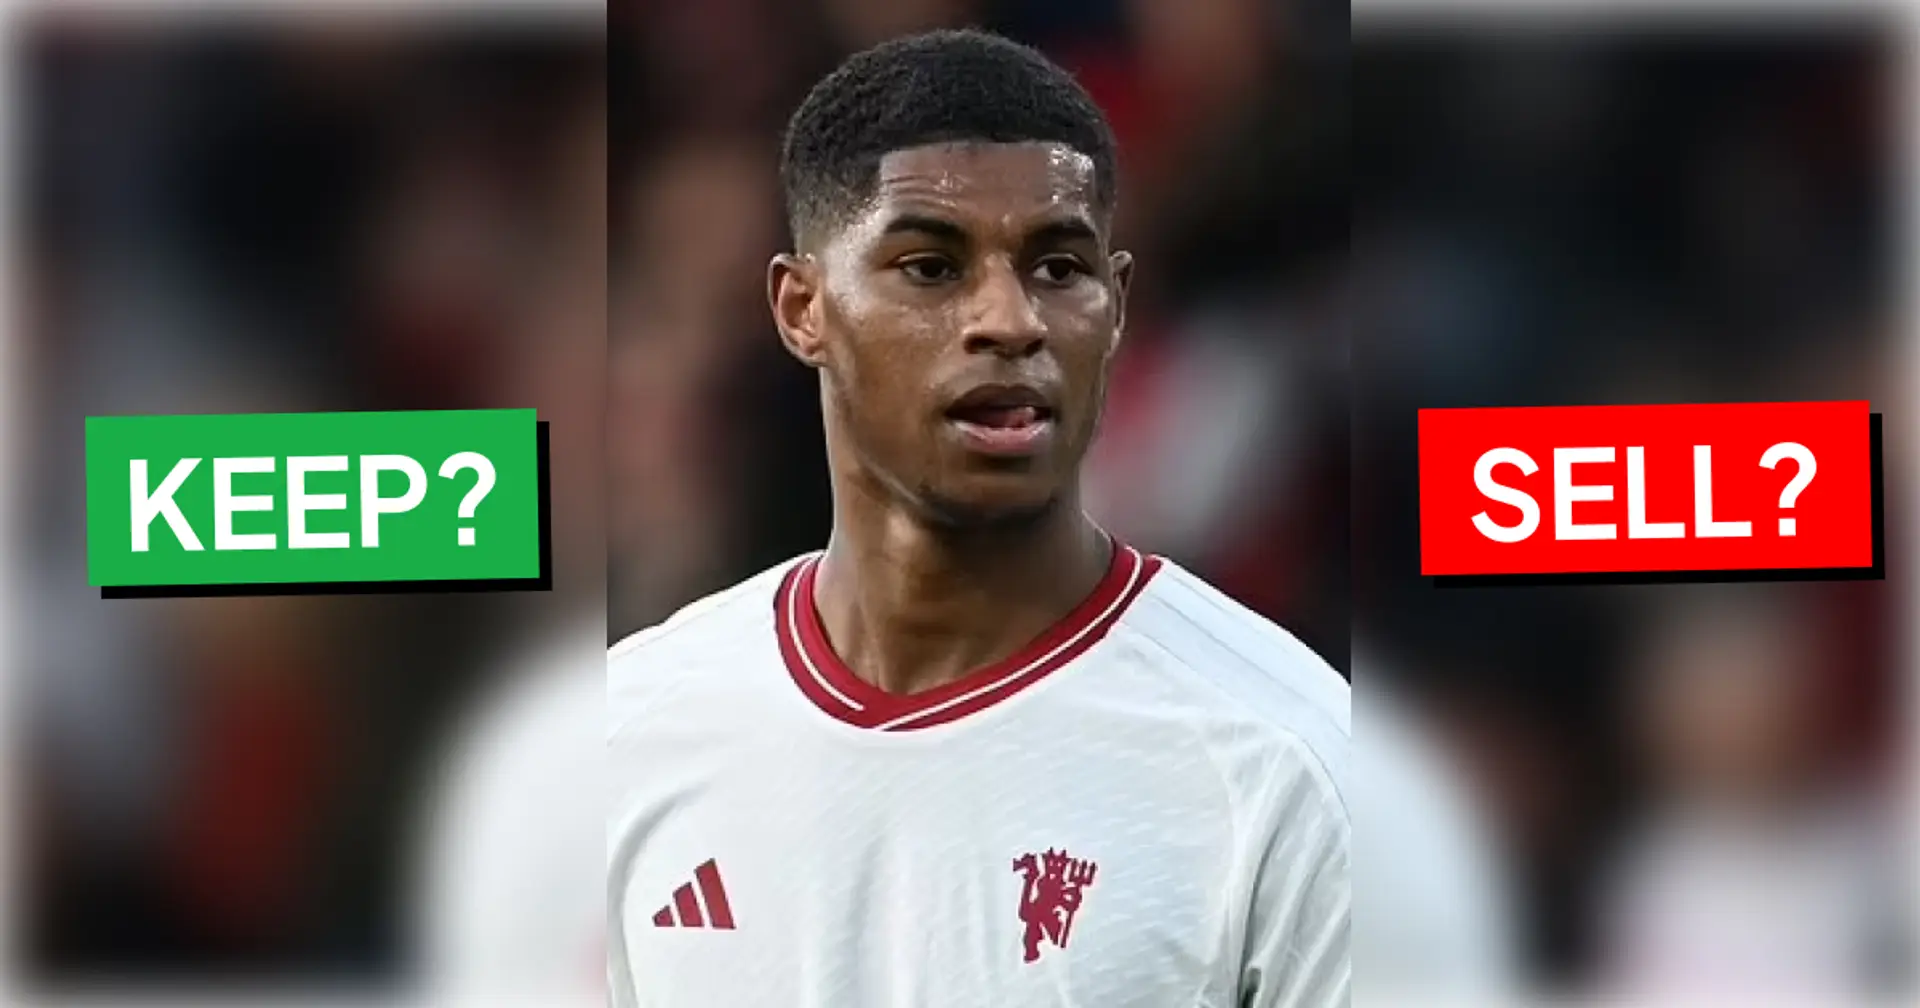 Rashford — keep or sell Arsenal fans split on Marcus’ future — have your say in the comments, too